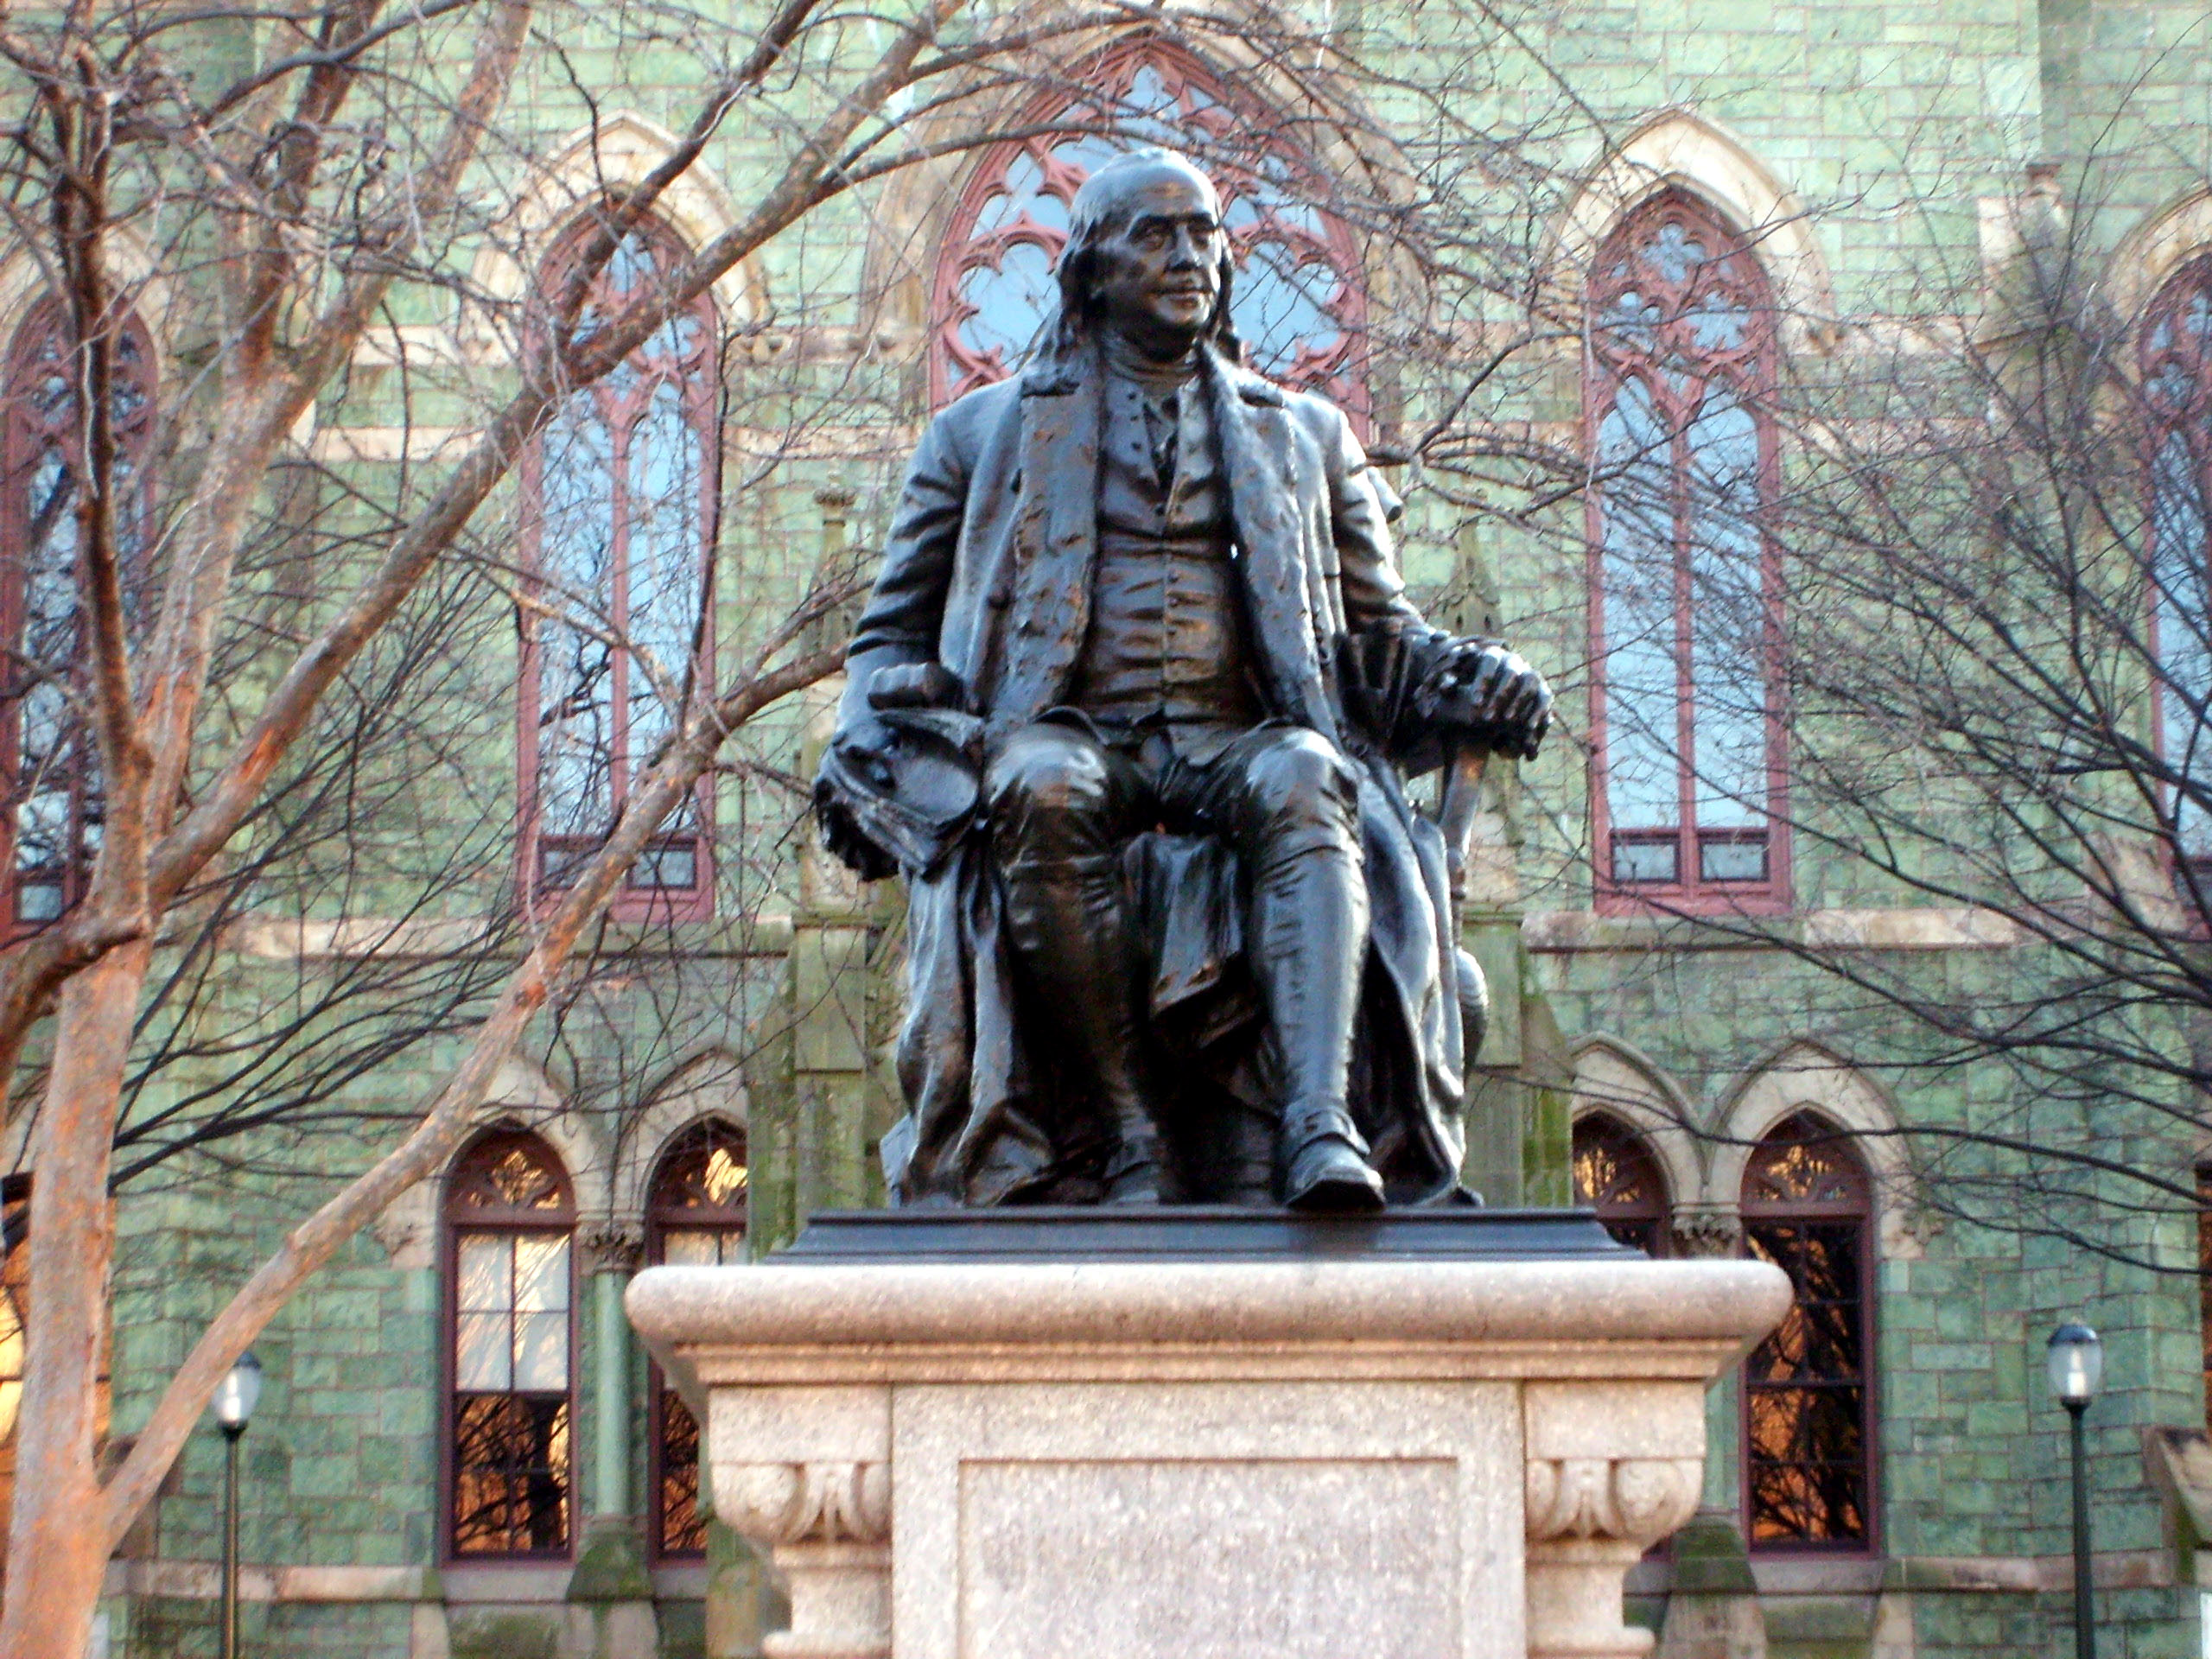 This statue of Benjamin Franklin donated by Justus C. Strawbridge to the City of Philadelphia in 1899 now sits in front of College Hall. [16]